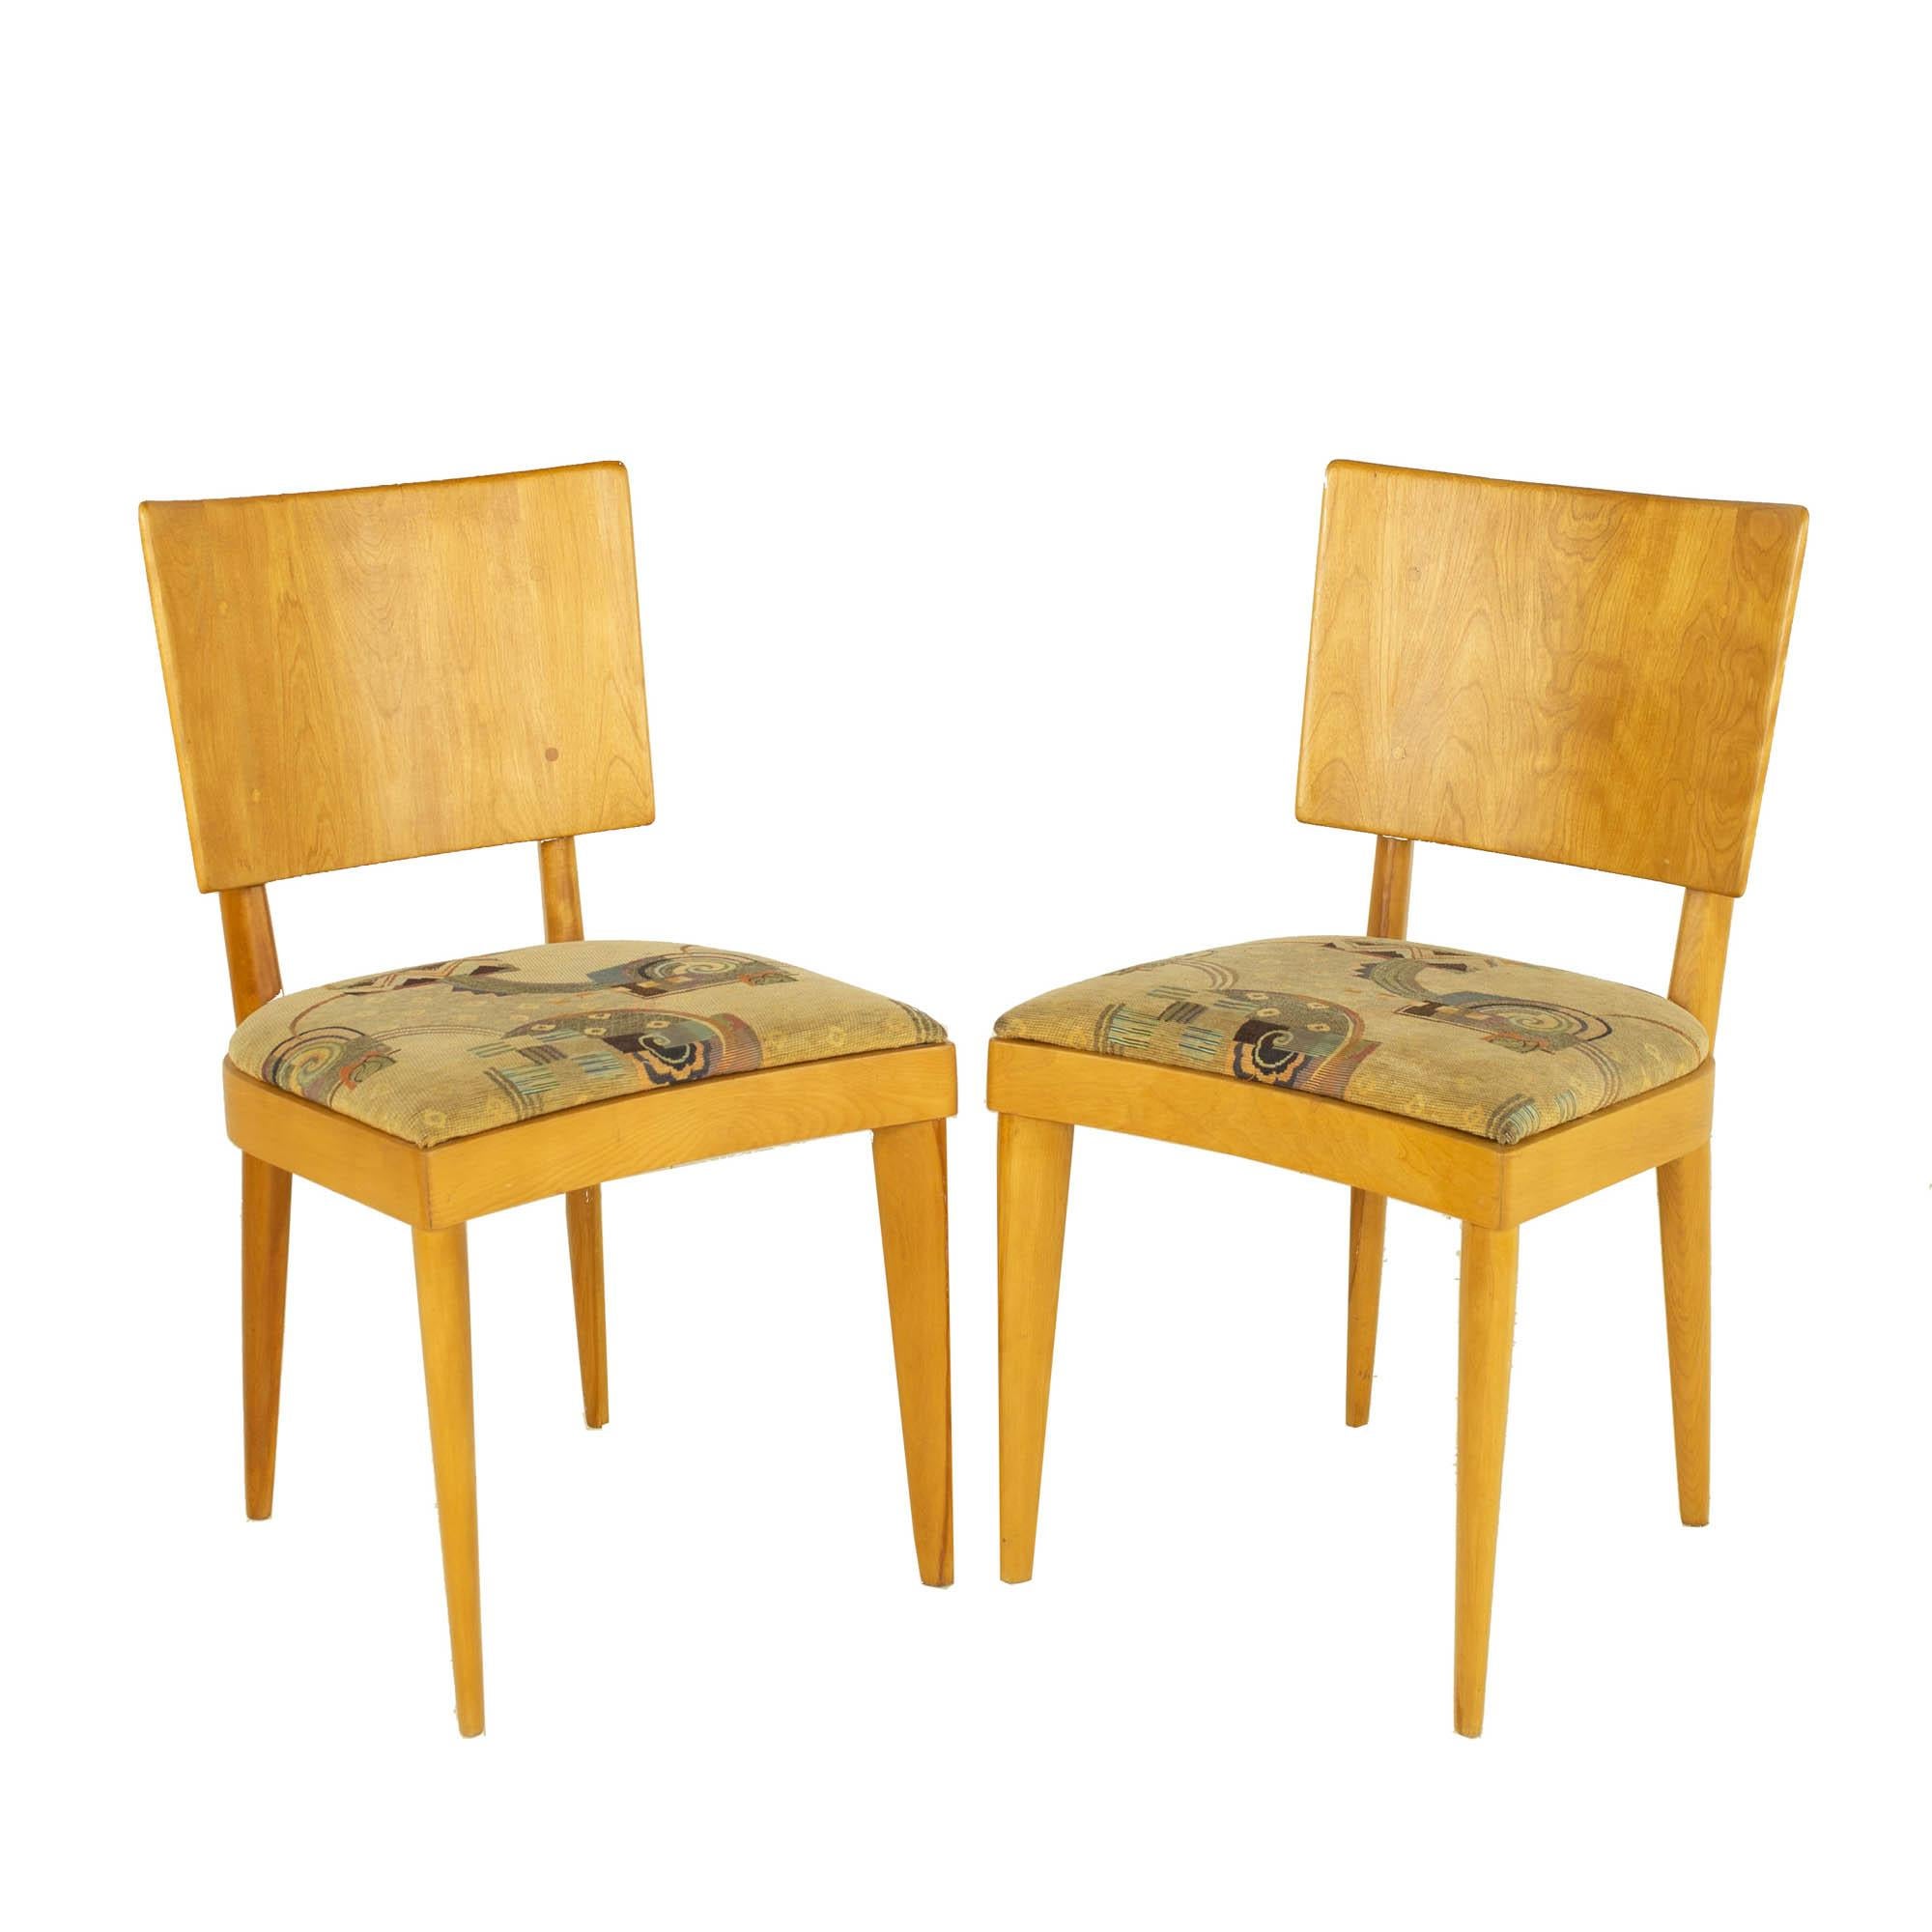 Heywood Wakefield mid century wheat solid wood dining chairs - A Pair

Each chair measures: 17.75 wide x 20.25 deep x 32.75 inches high, with a seat height of 18 inches

All pieces of furniture can be had in what we call restored vintage